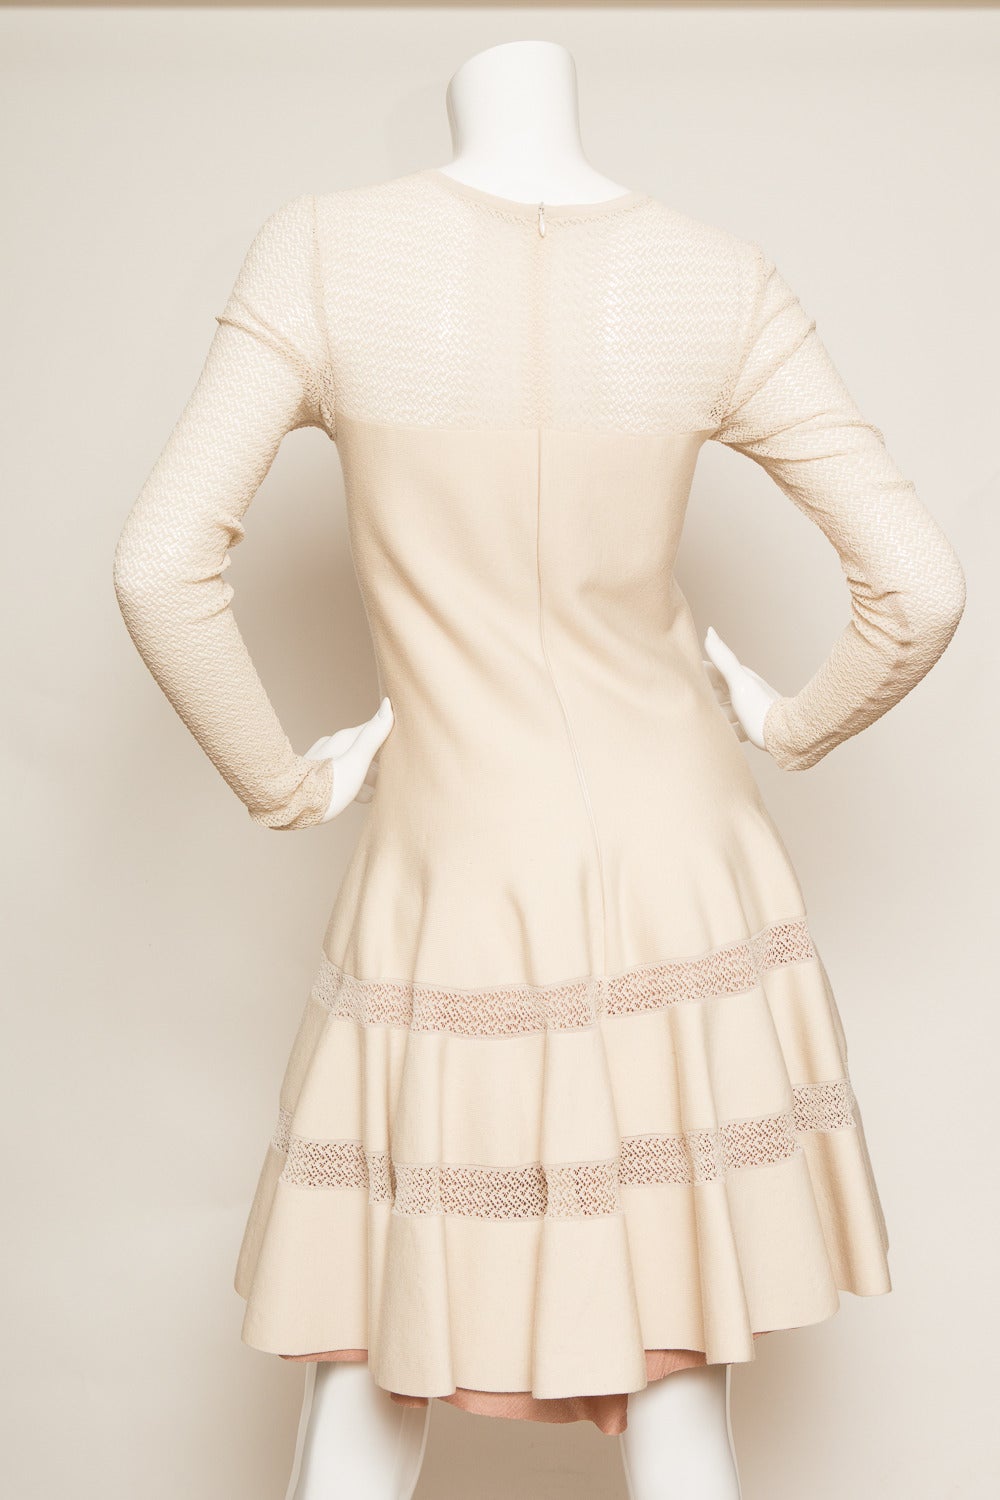 Creme Alaïa long sleeve fit and flare wool dress with textured pattern throughout, pleated trim at skirt and invisible back zip closure.

Sleeve Length: 27